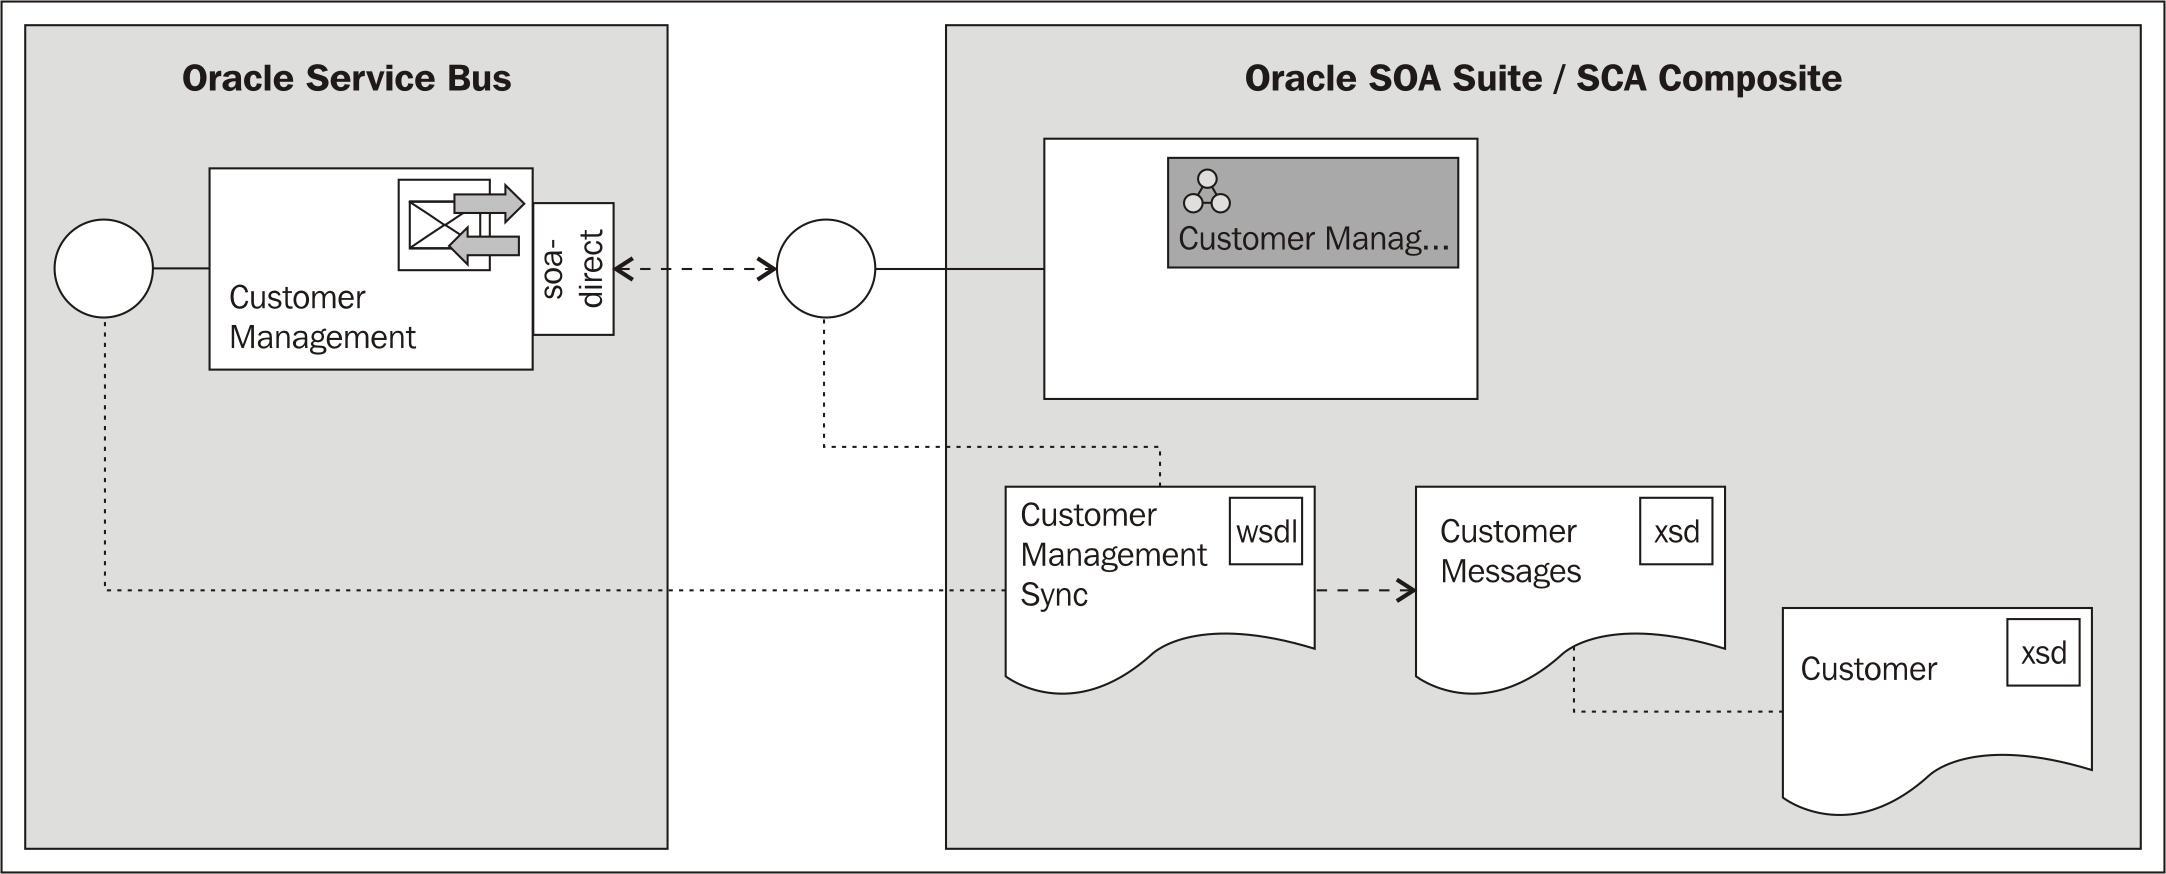 Invoking a SCA composite synchronously from an OSB service